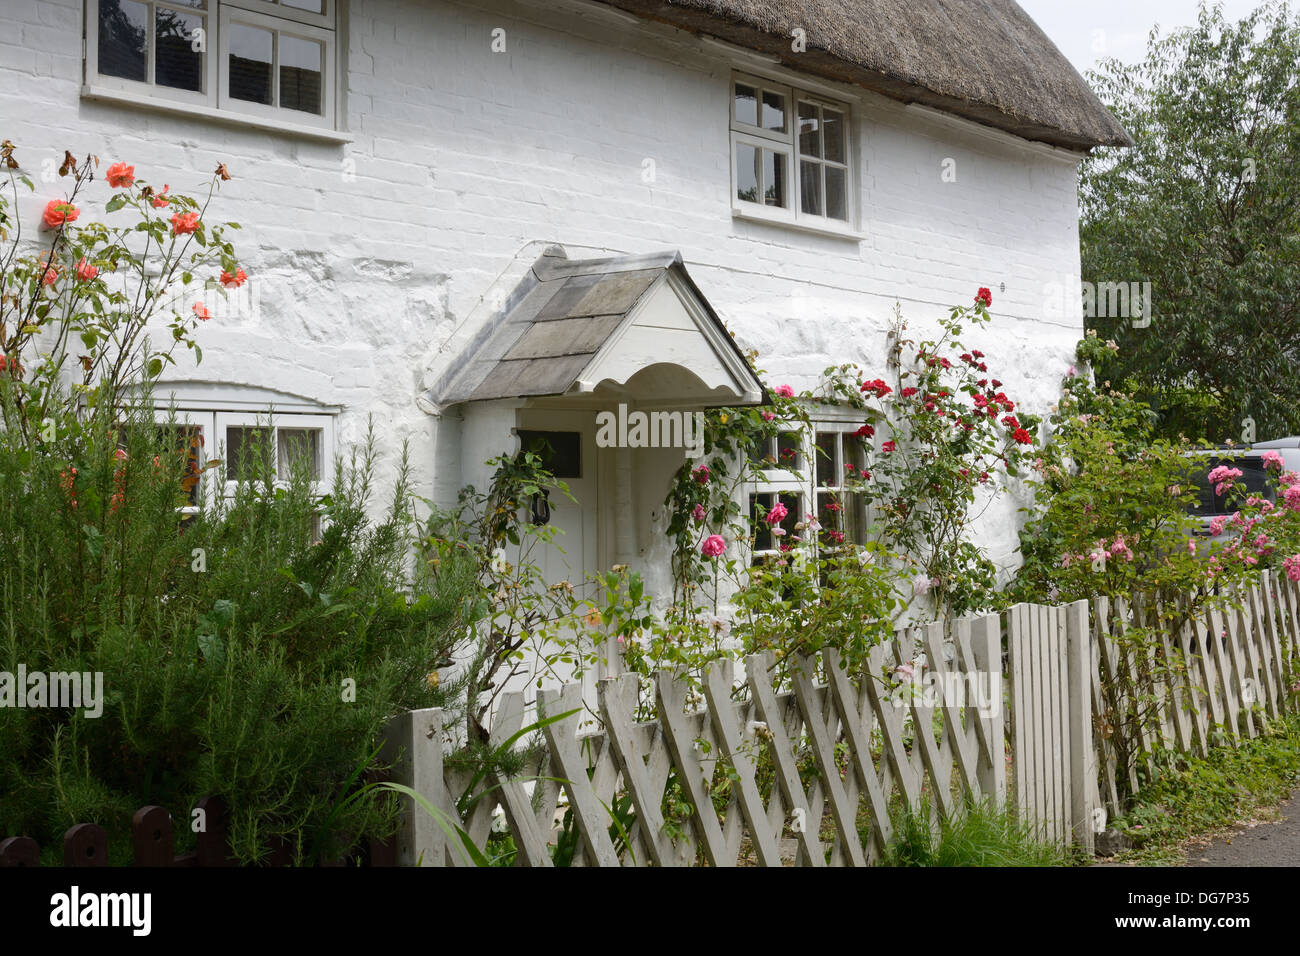 Typical Old English Country Cottage With Thatched Roof And